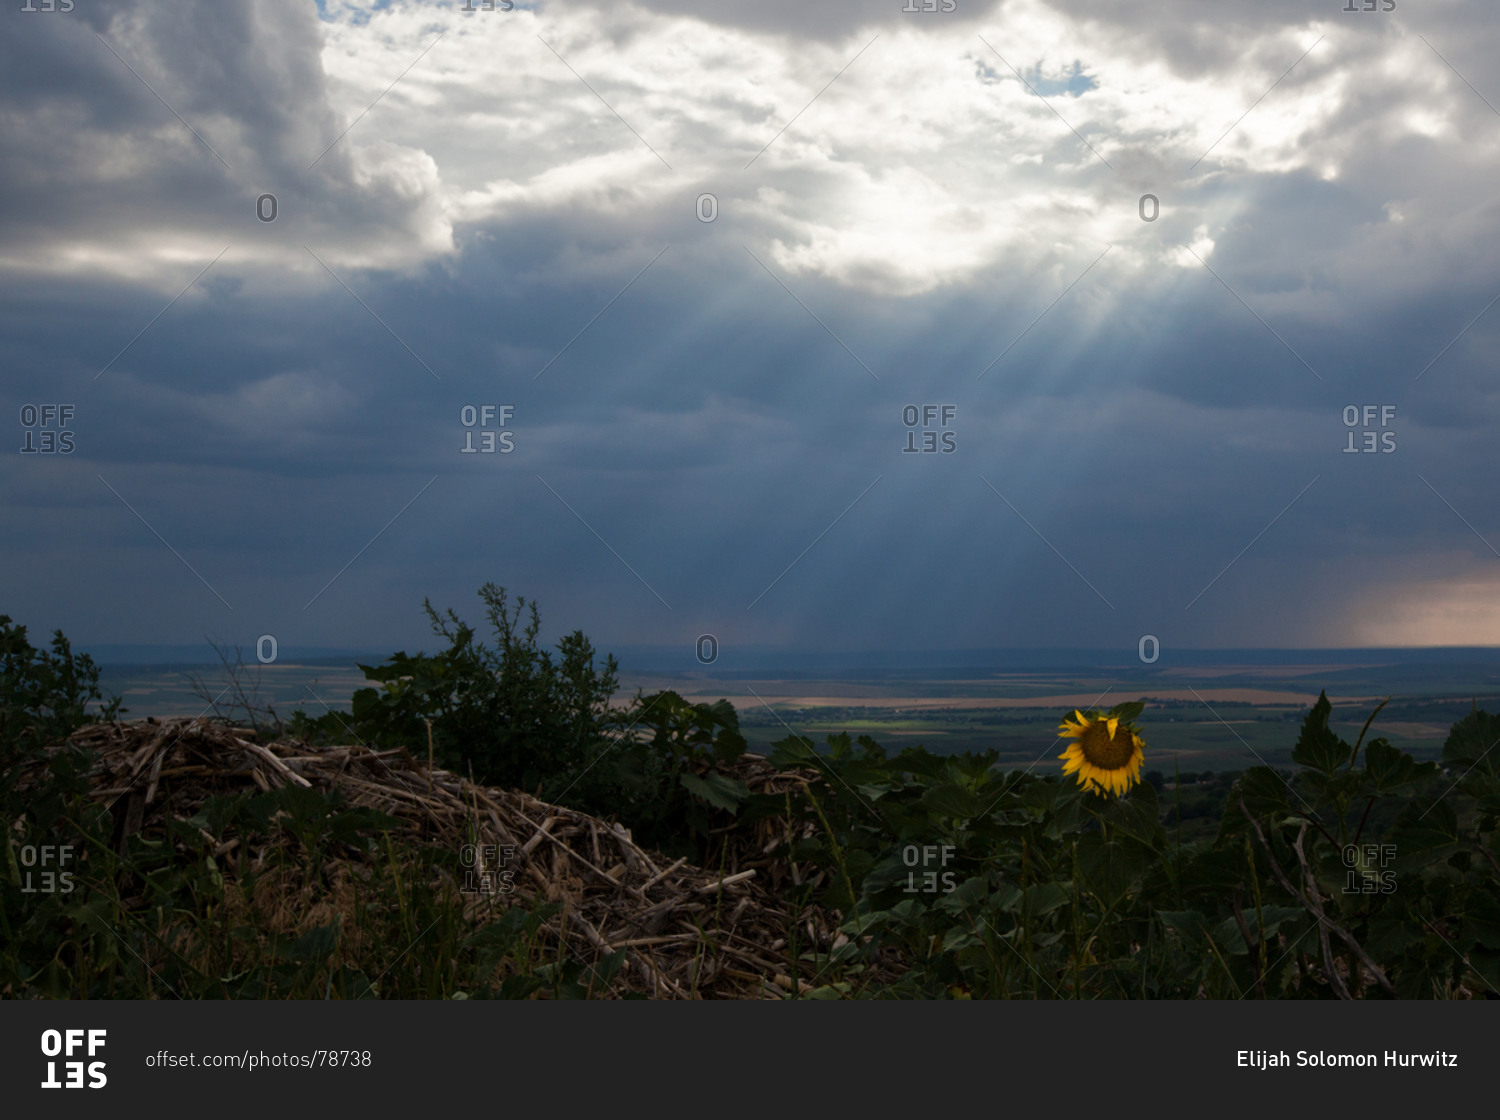 The sun shines on a sunflower in Moldova's first national park